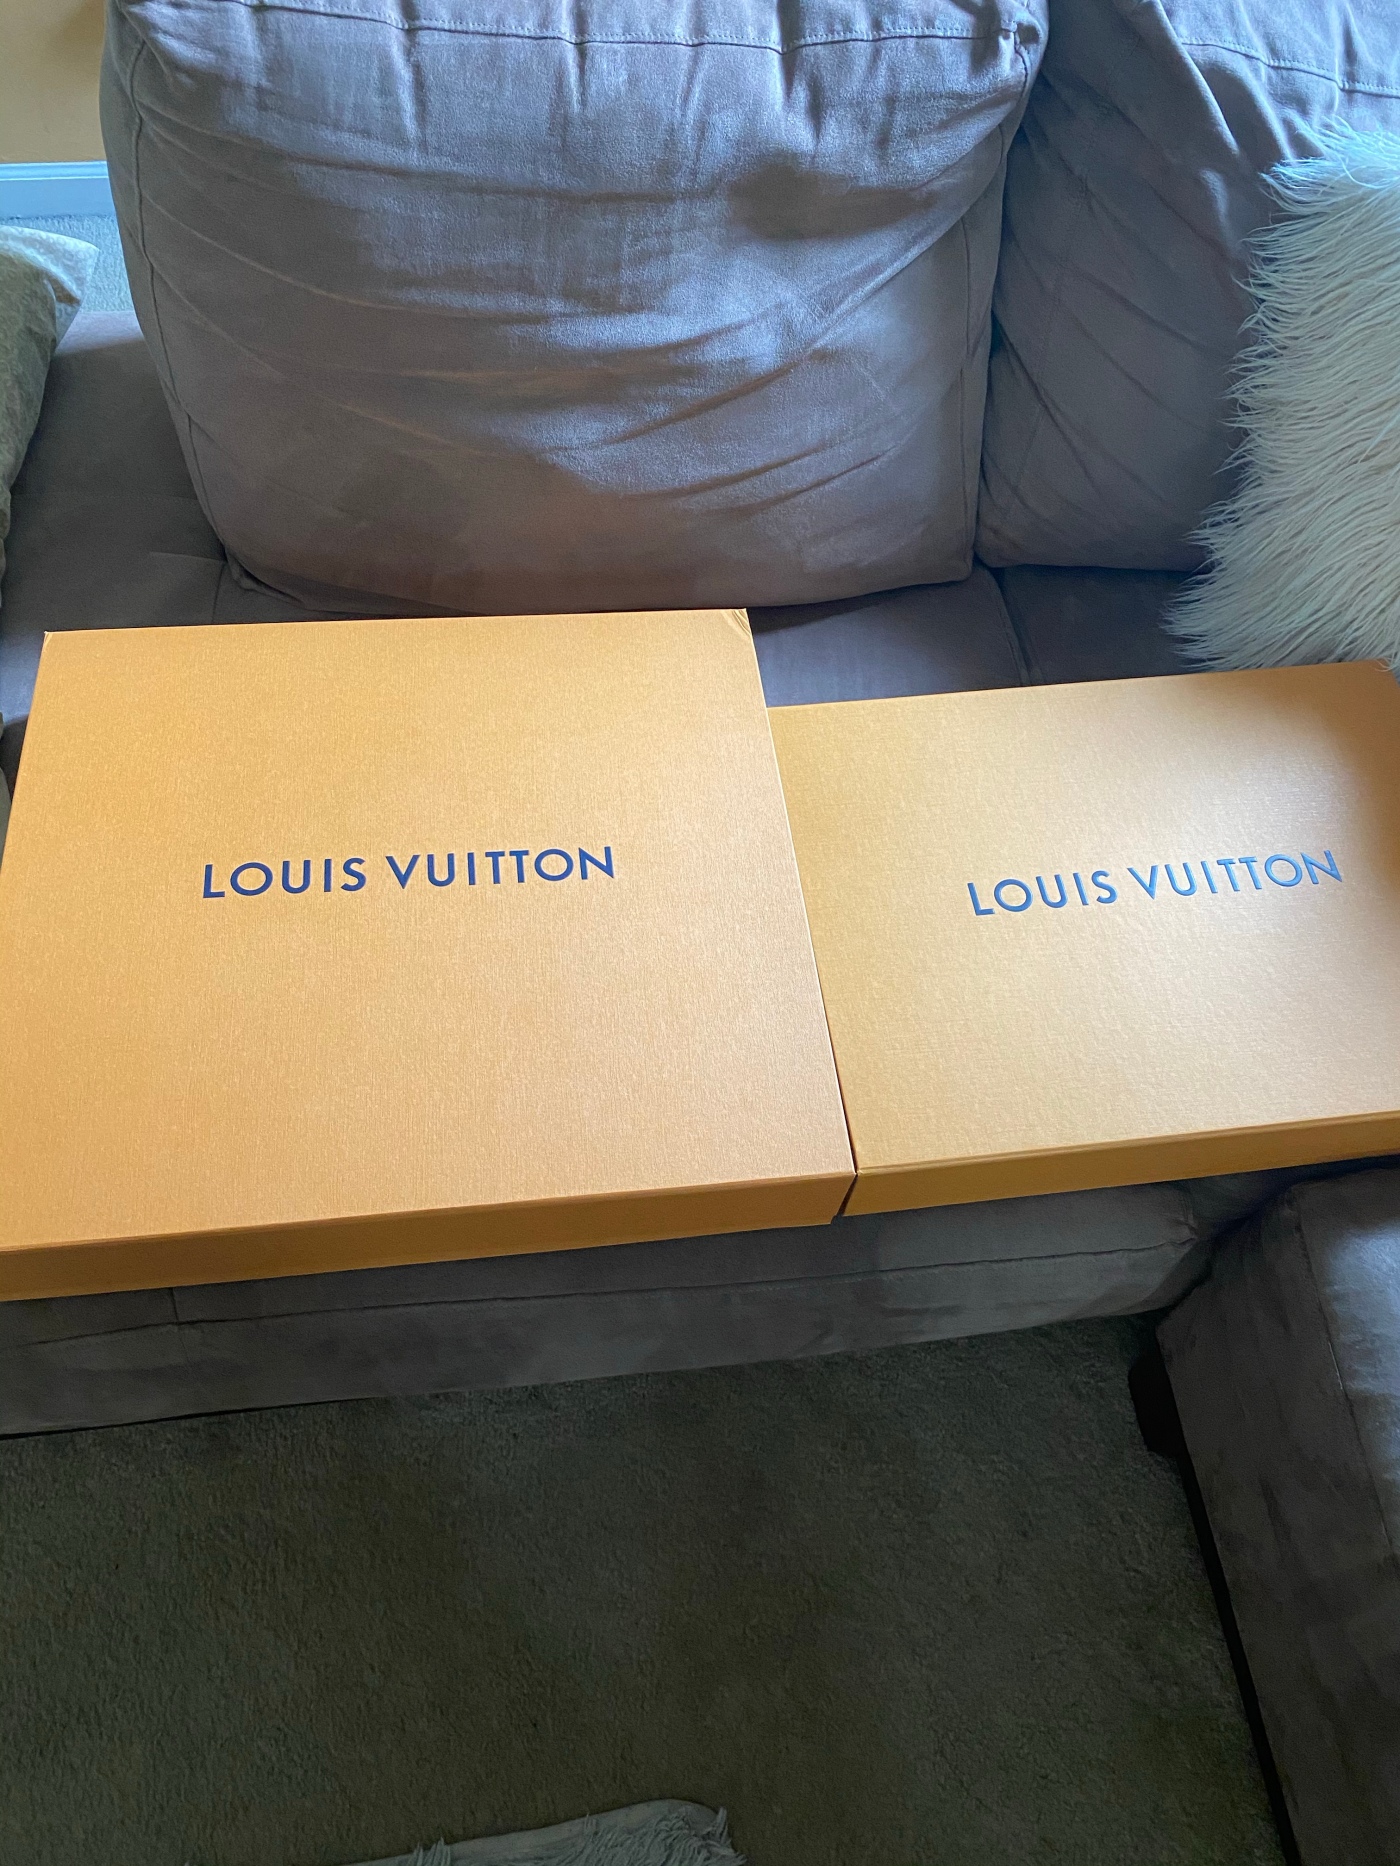 Everything You Need to Know About the Louis Vuitton Packaging Box